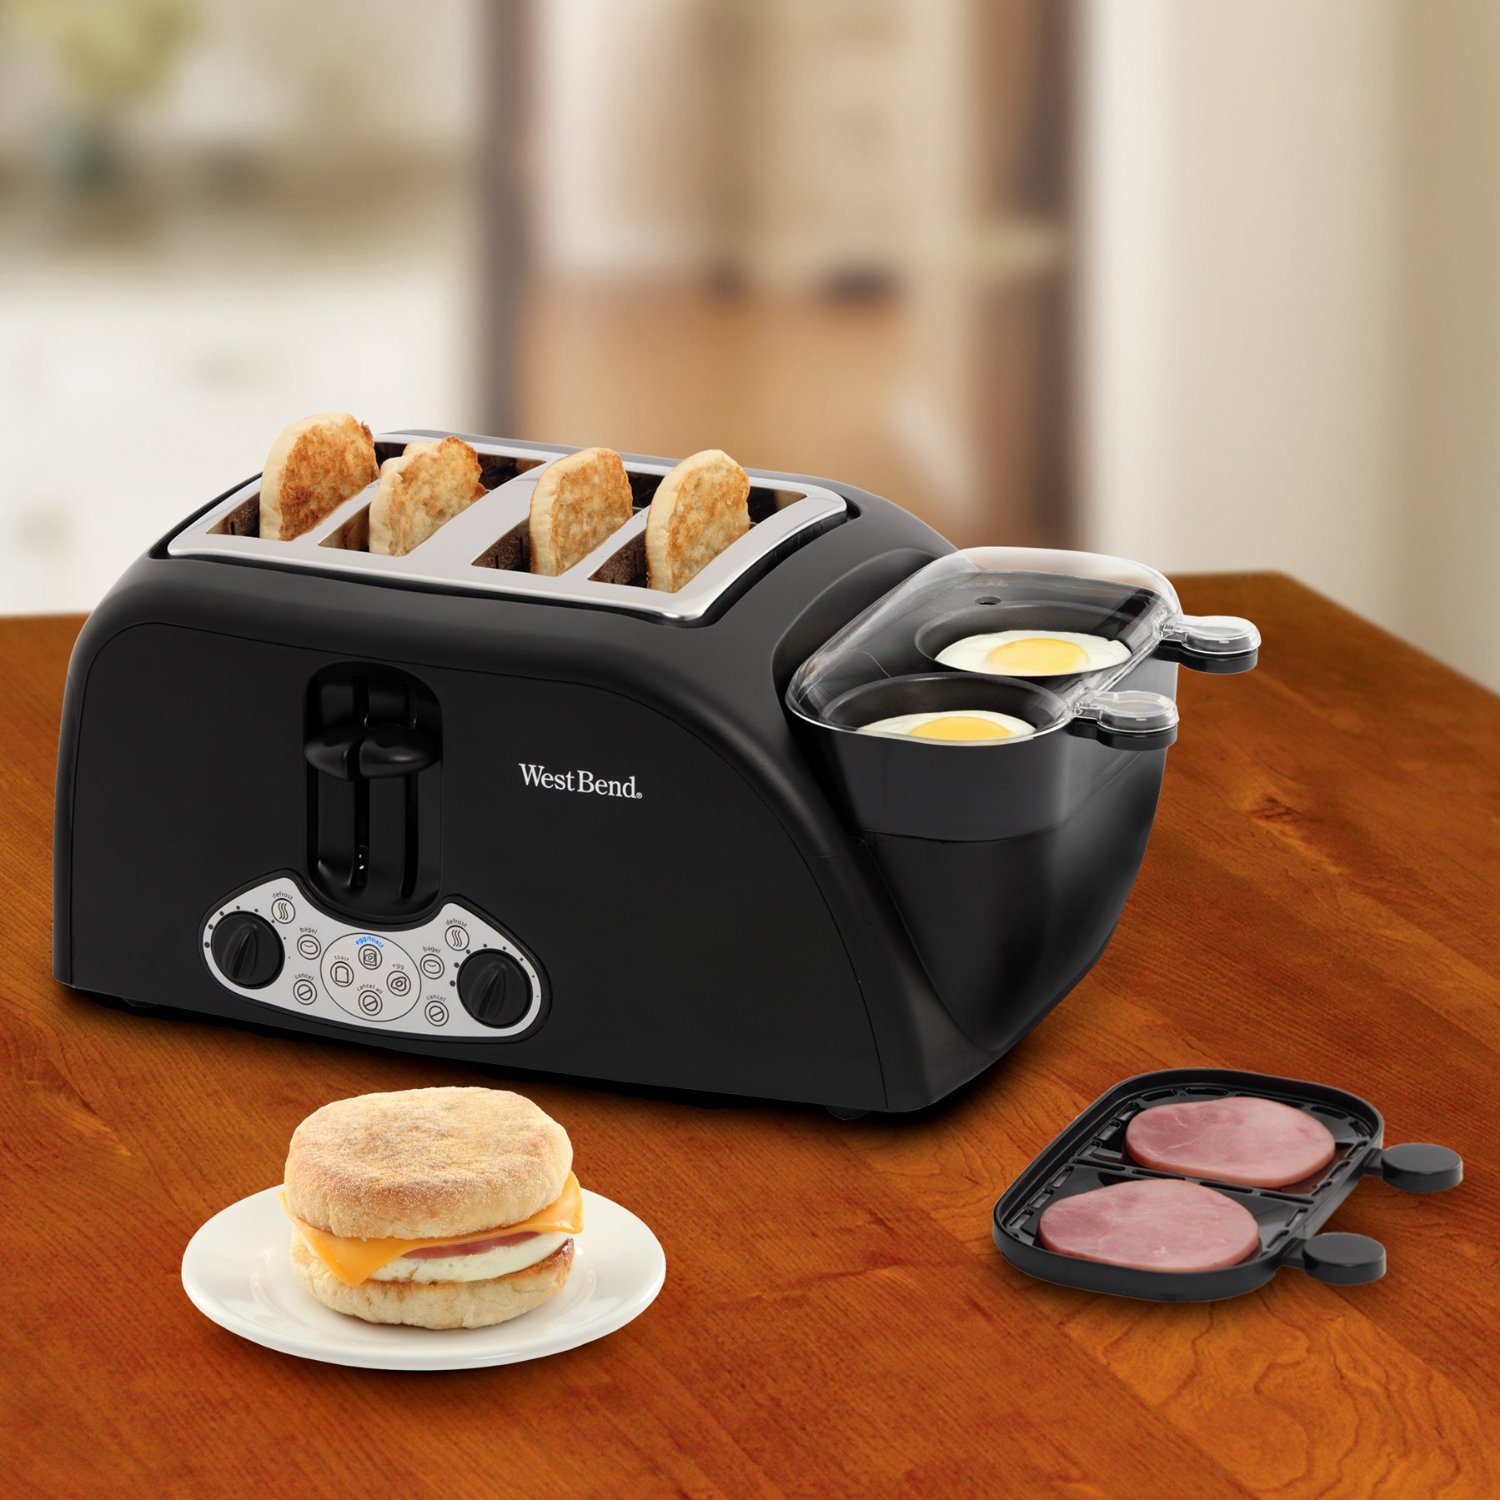 https://www.holycool.net/wp-content/uploads/2014/02/West-Bend-TEM4500W-Egg-and-Muffin-Toaster.jpg